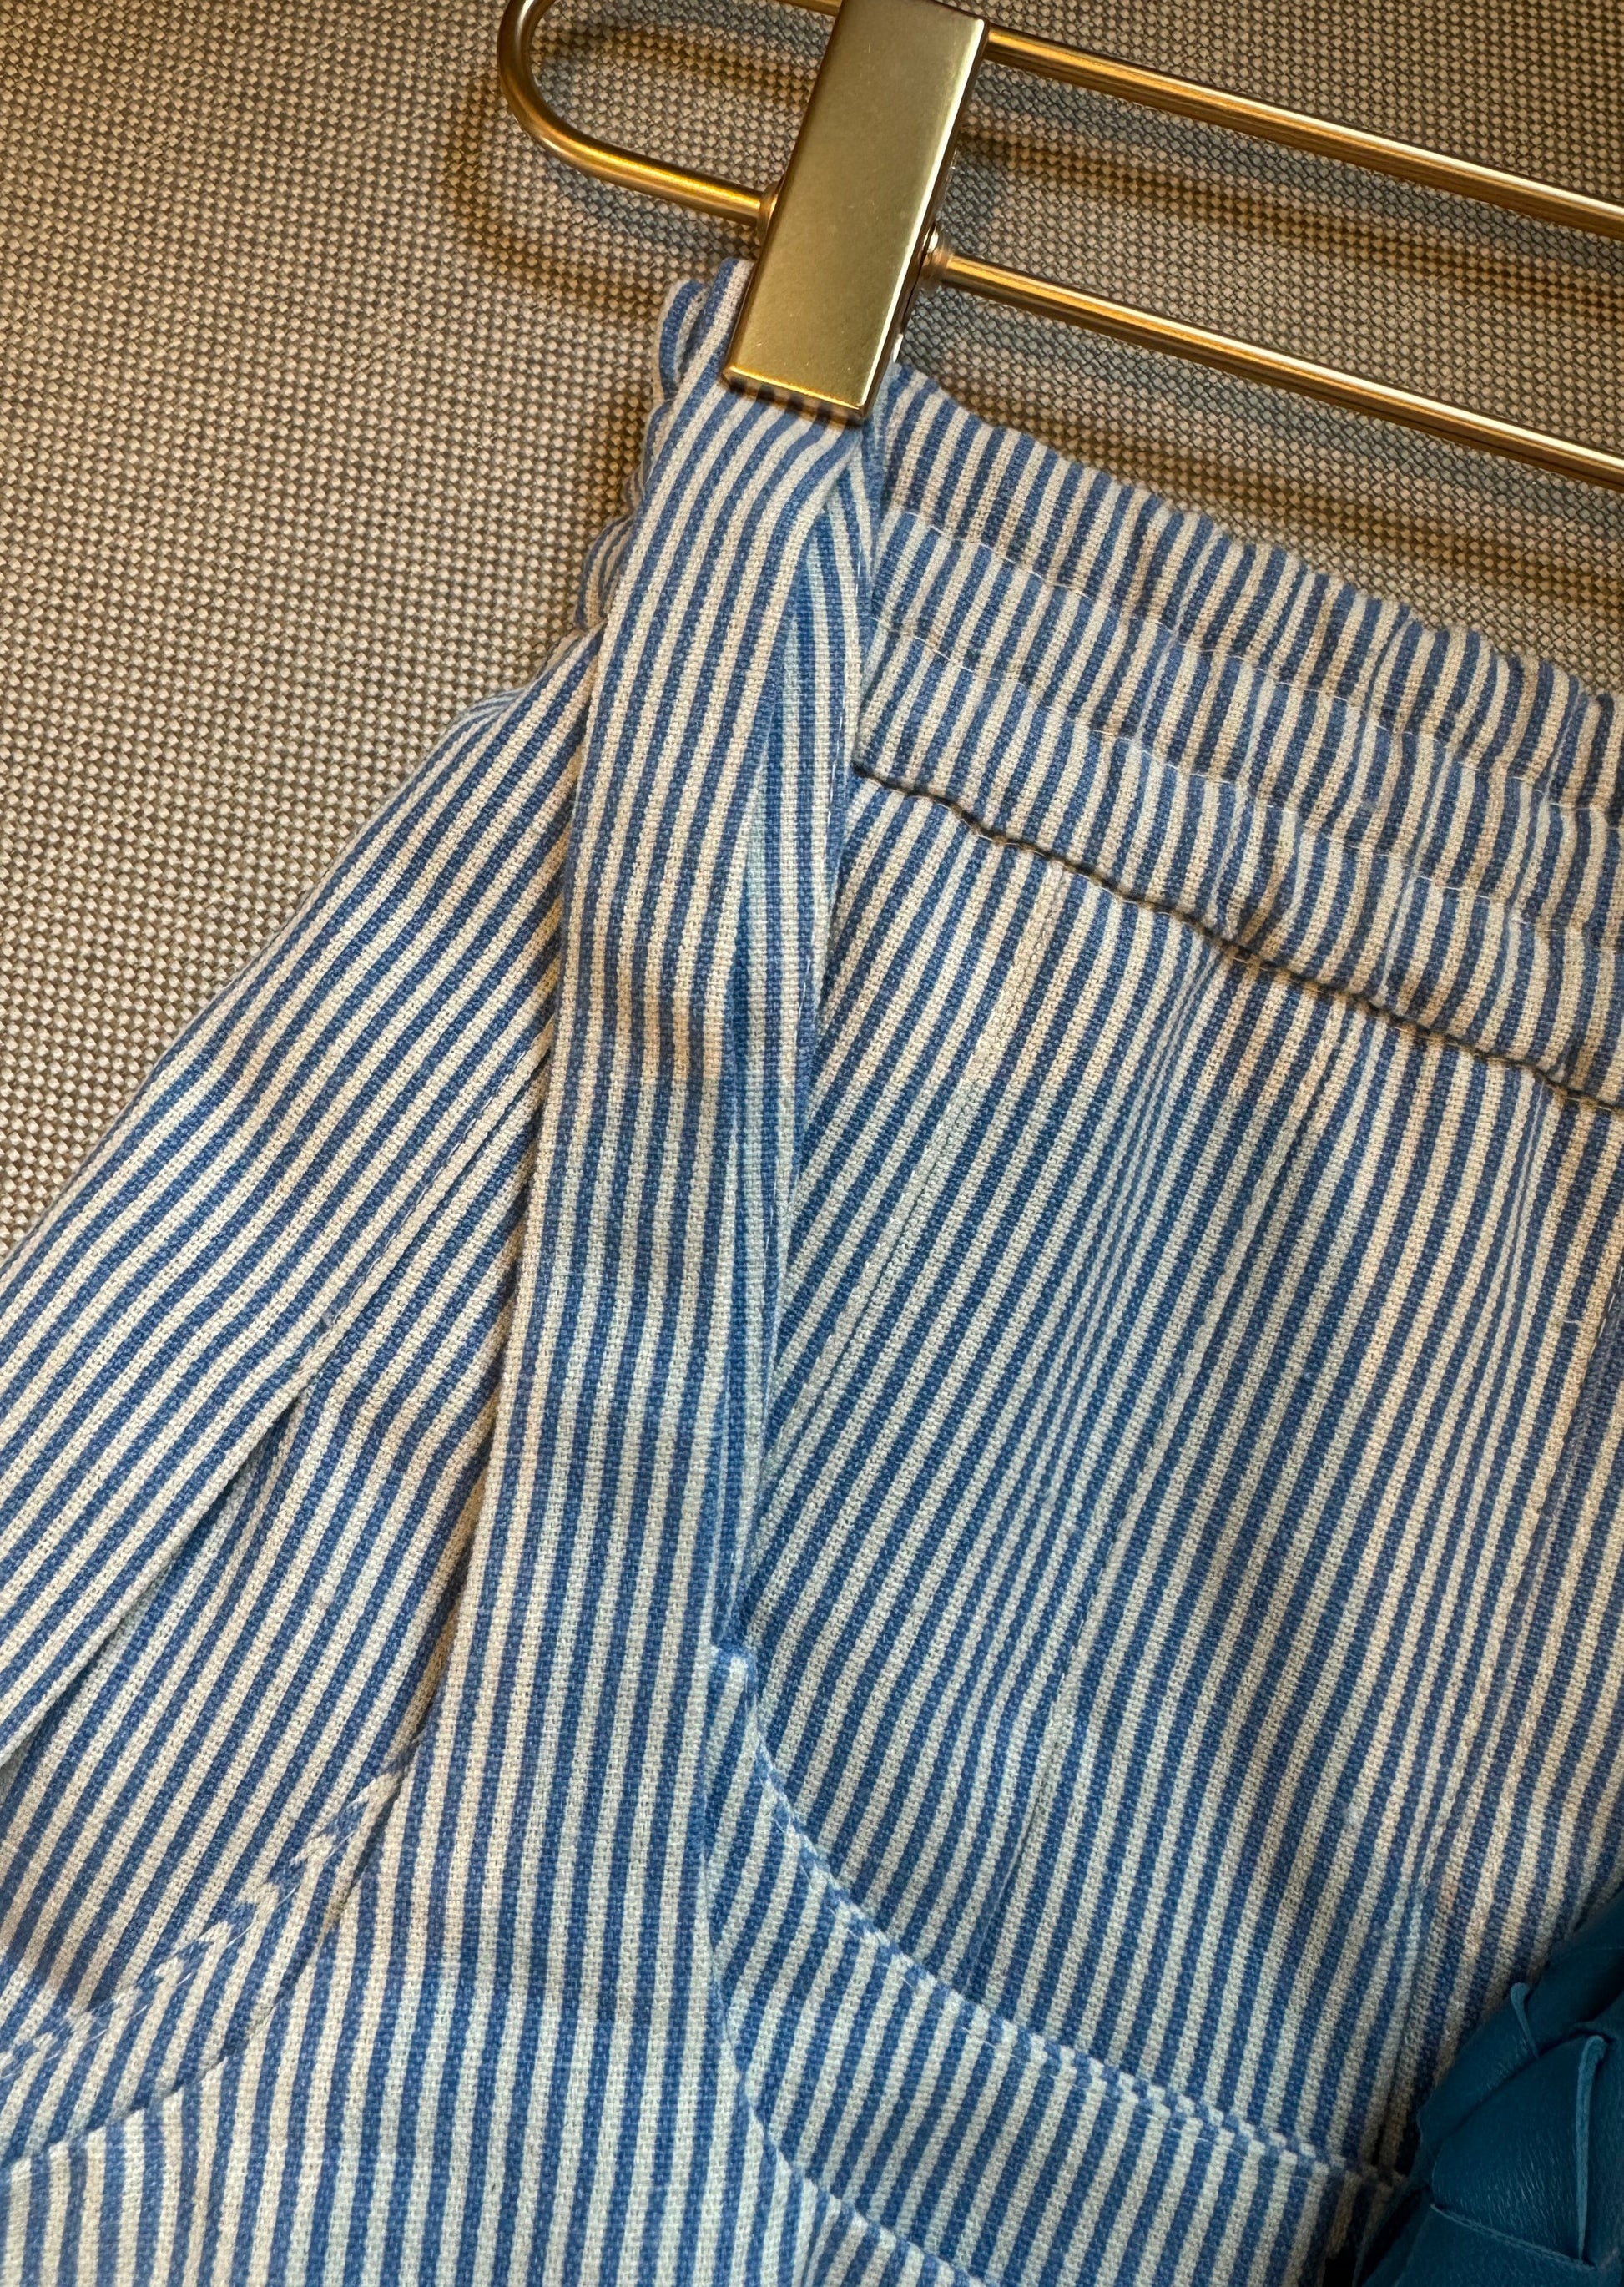 Details of the blue suit, top and skirt